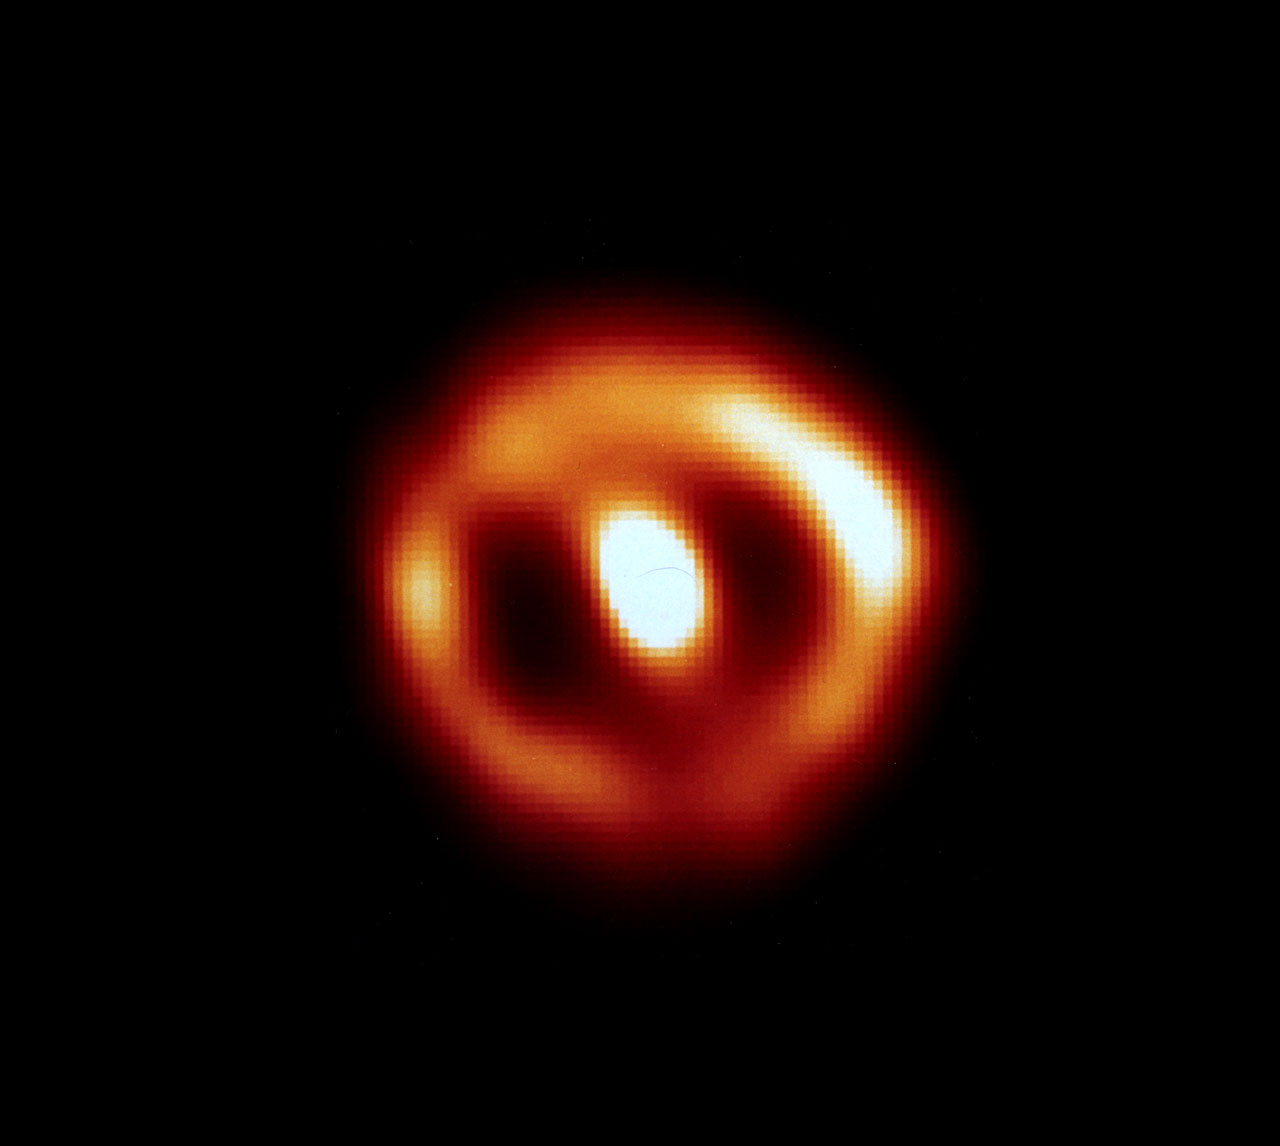 An image taken with FOC. The shell surrounds Nova Cygni 1992 which erupted on February 19, 1992.